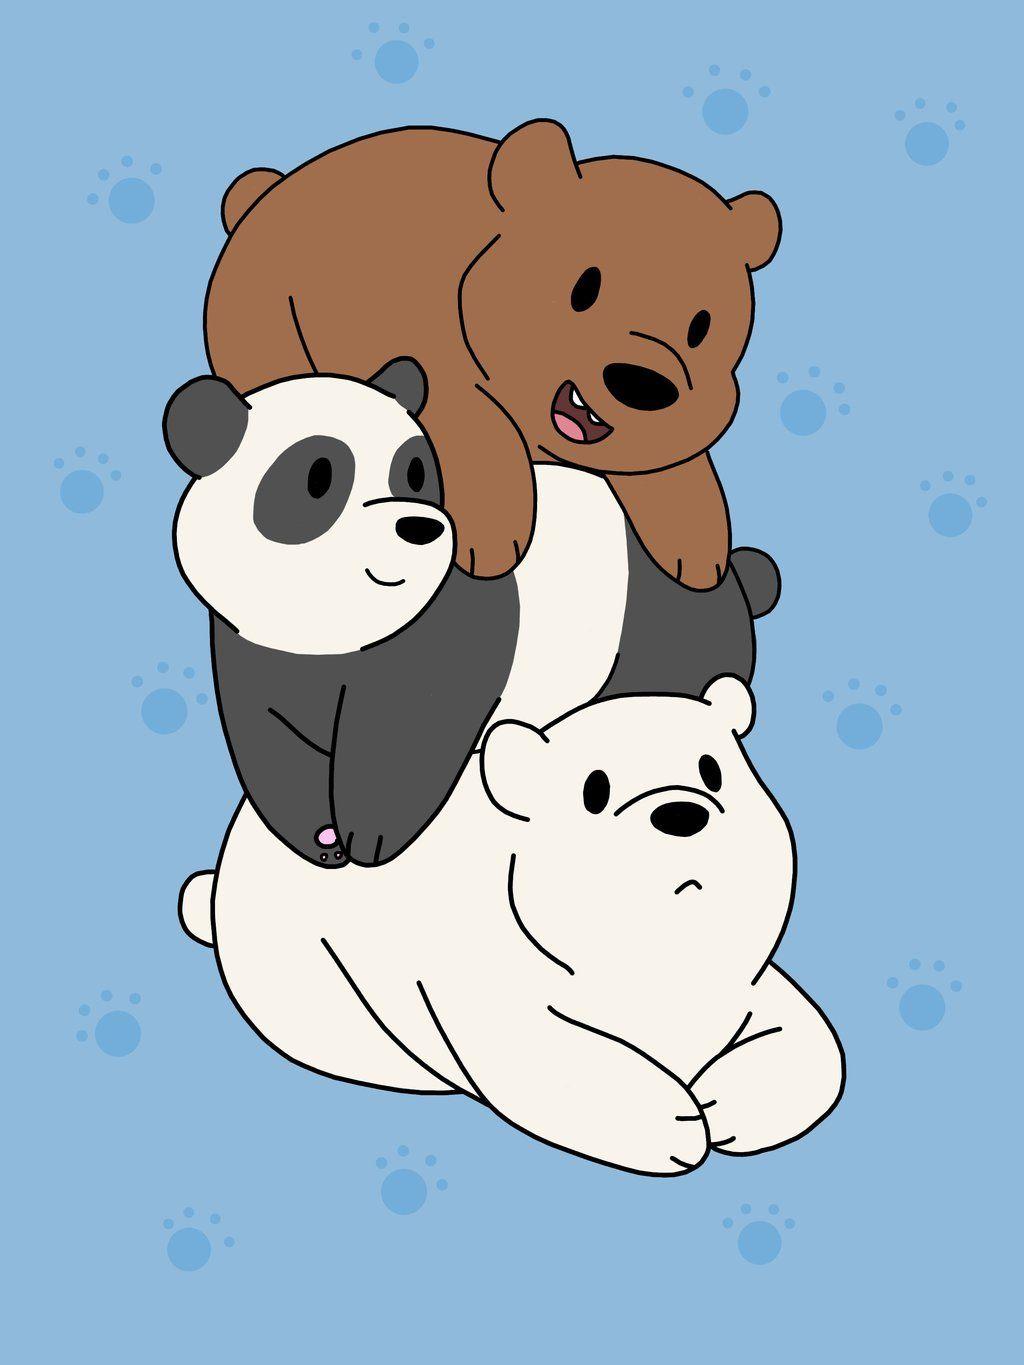 We Bare Bears Wallpaper, Image Collection Of We Bare Bears